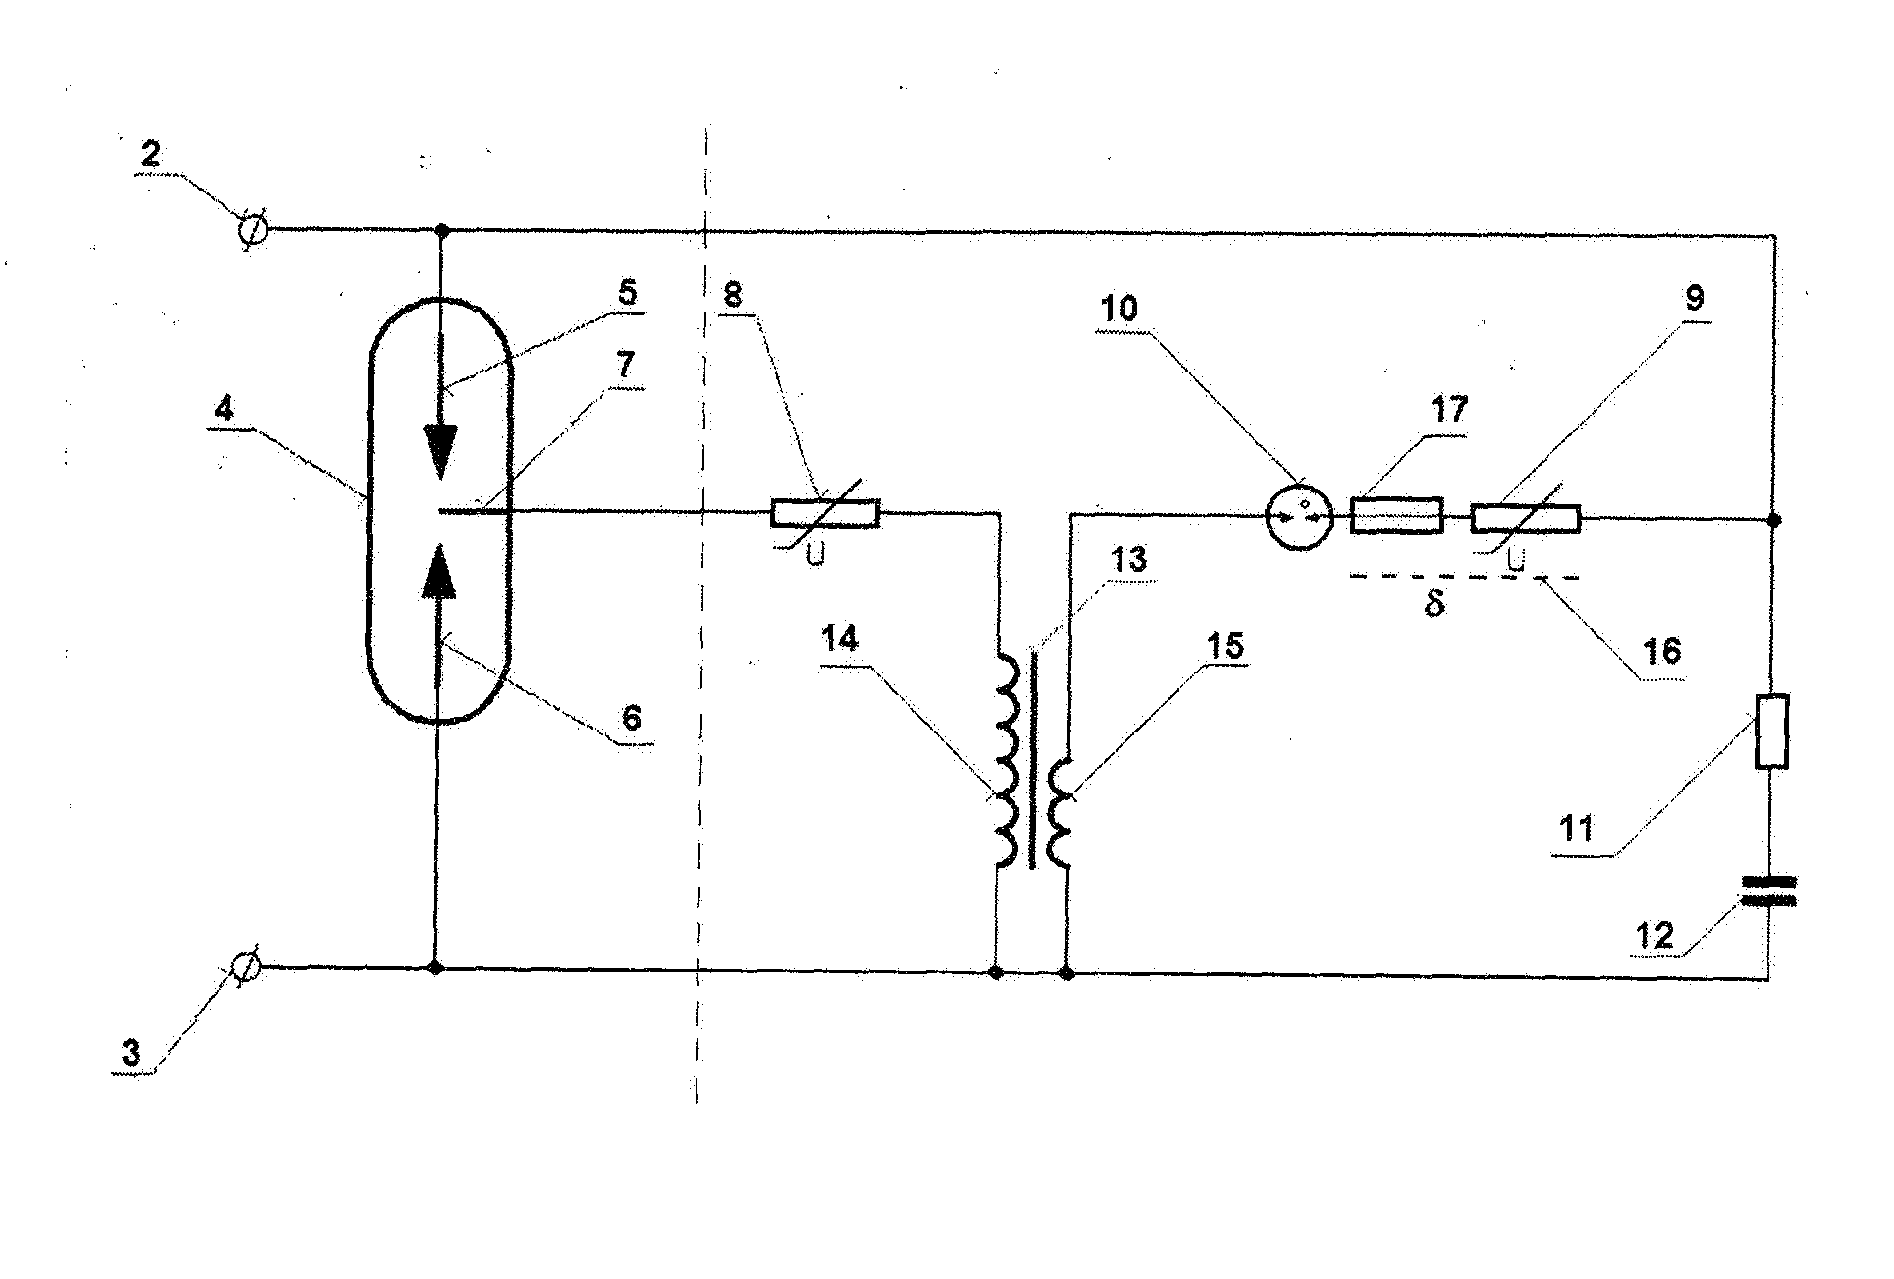 Triggering circuit of the overvoltage protection